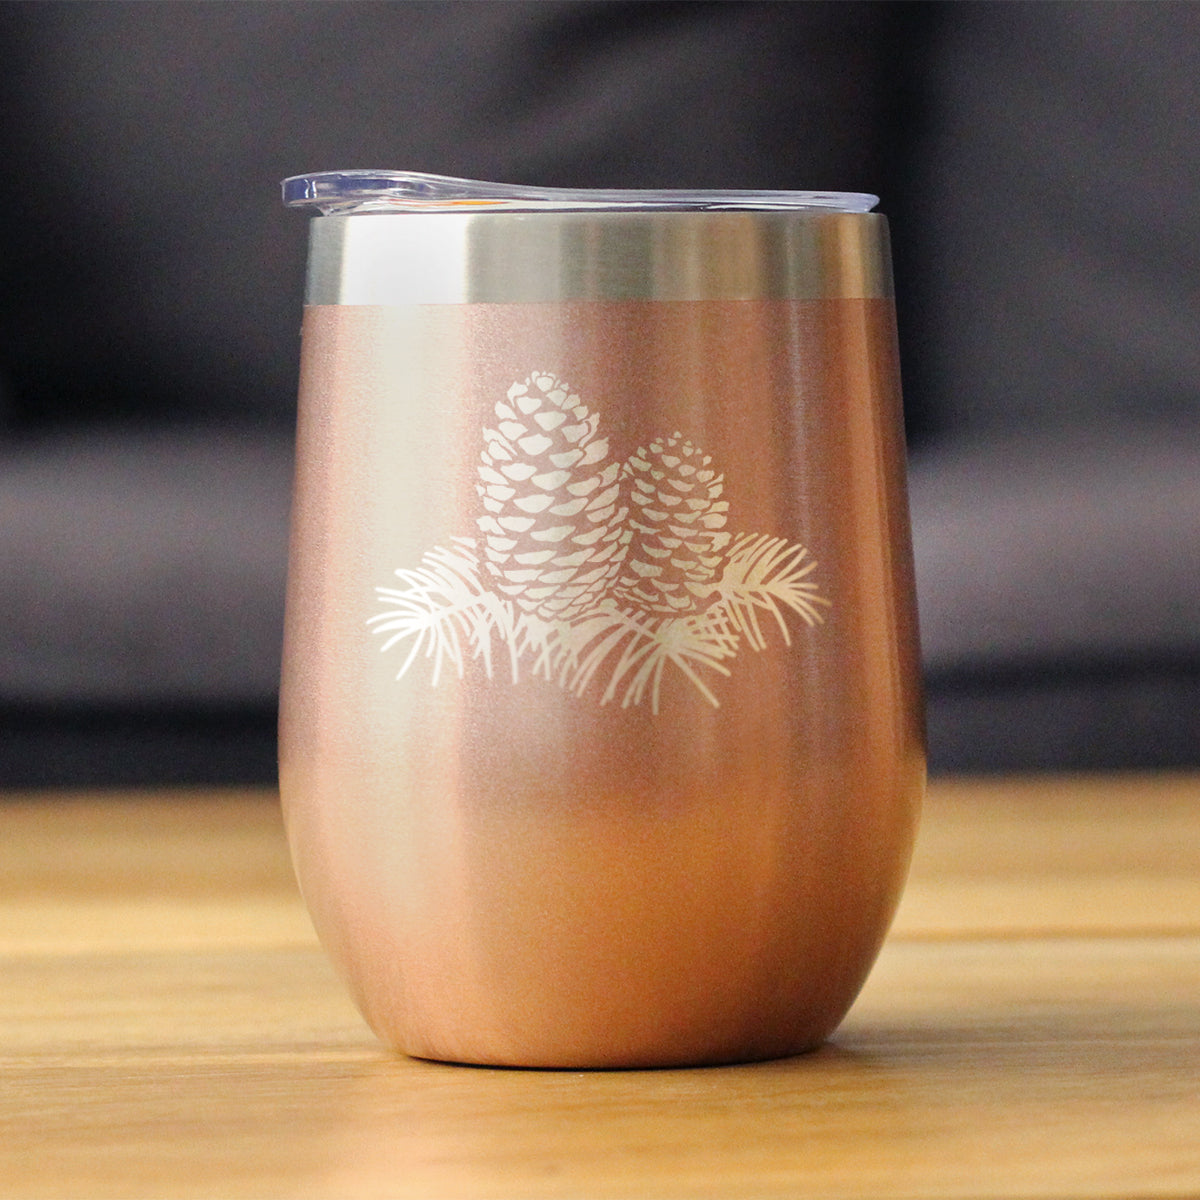 Pinecones - Cute Rustic and Cabin Themed Decorations - Wine Tumbler